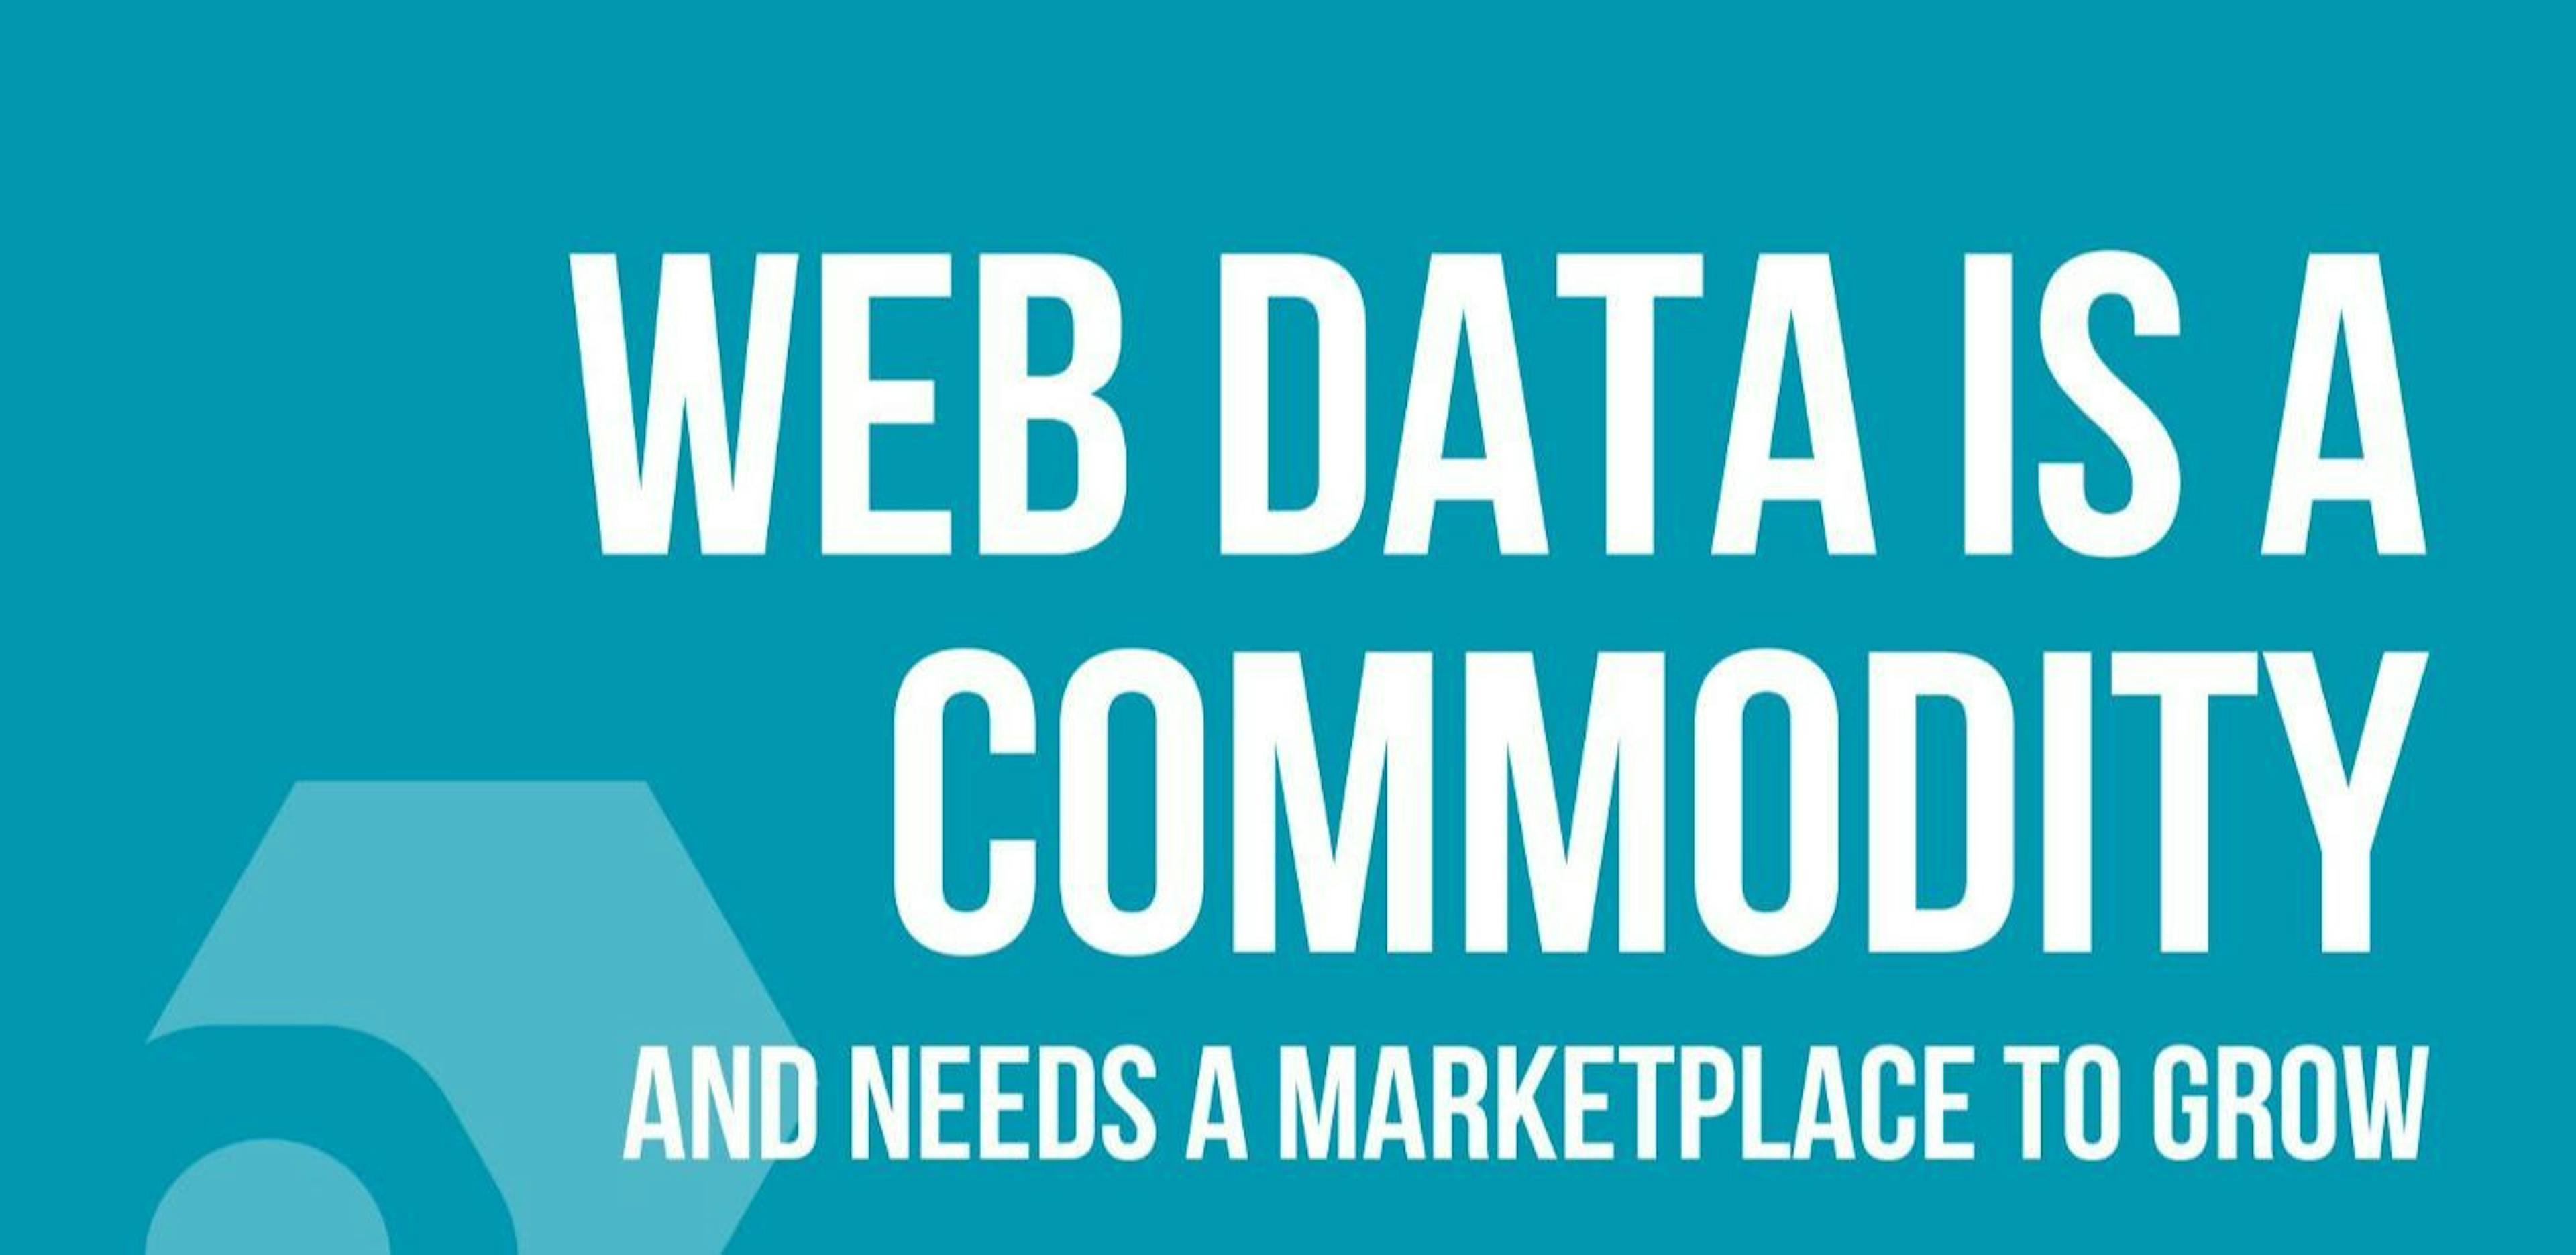 featured image - Web Data Has Become a Commodity and Needs a Marketplace to Grow